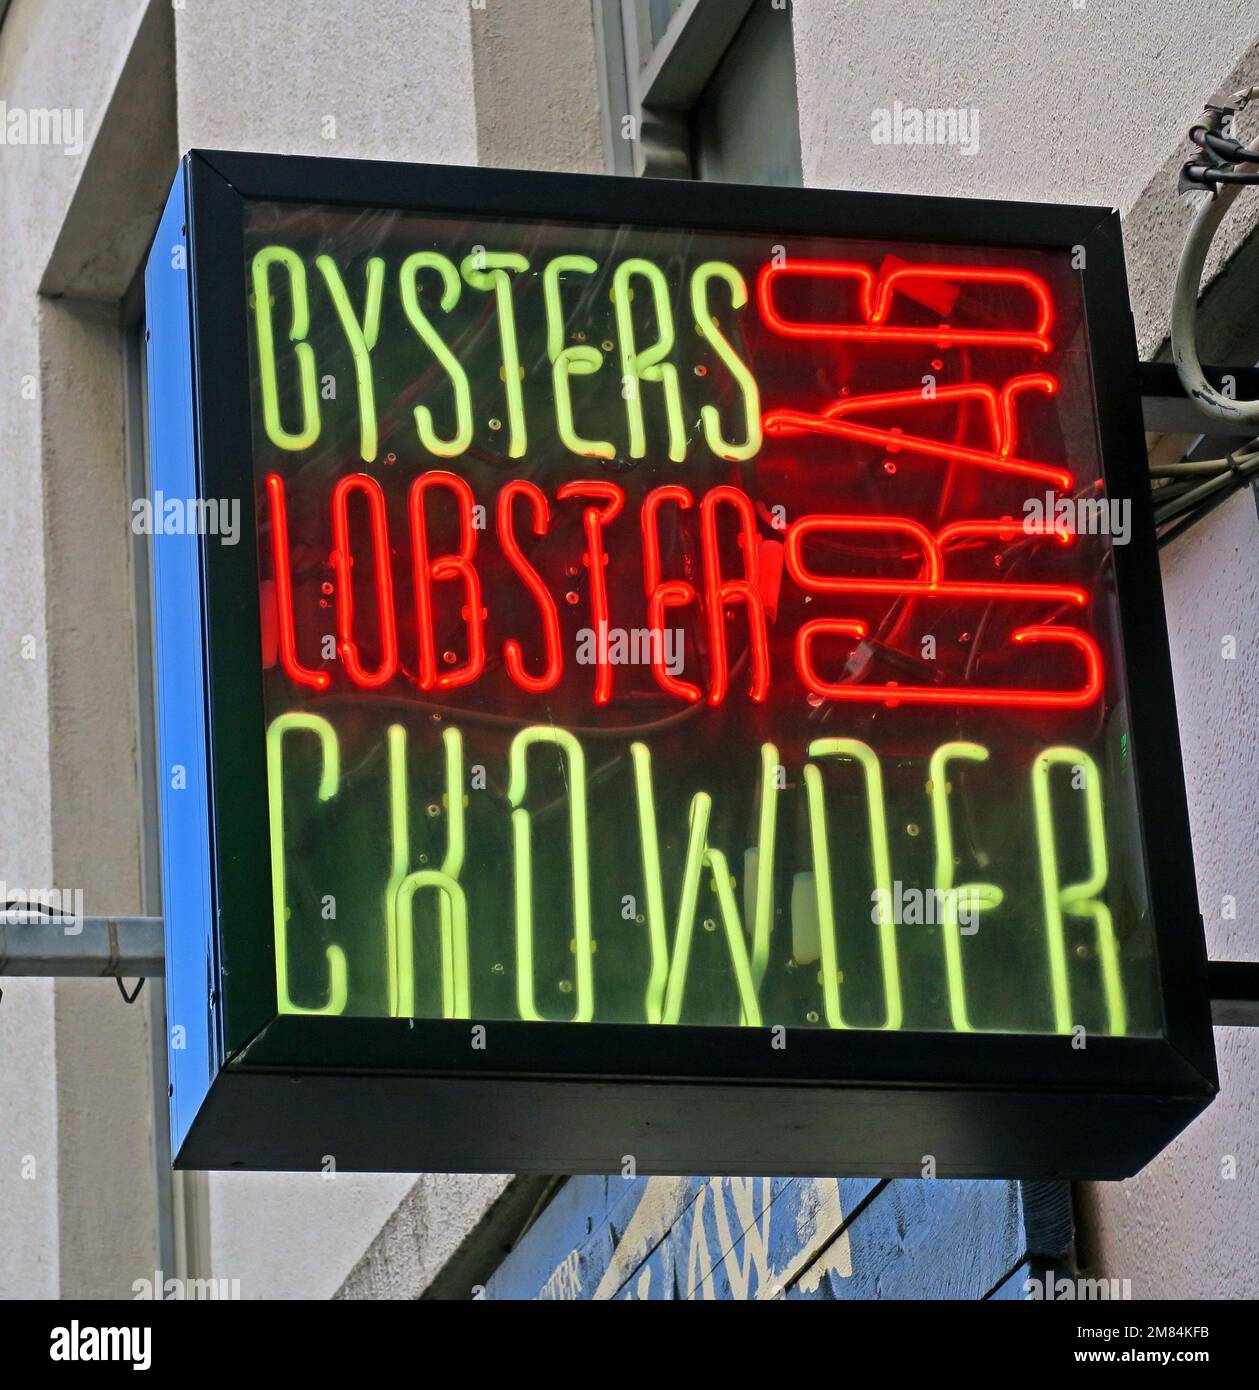 Neon sign, Oysters, crab, lobster, chowder - all types of seafood Stock Photo